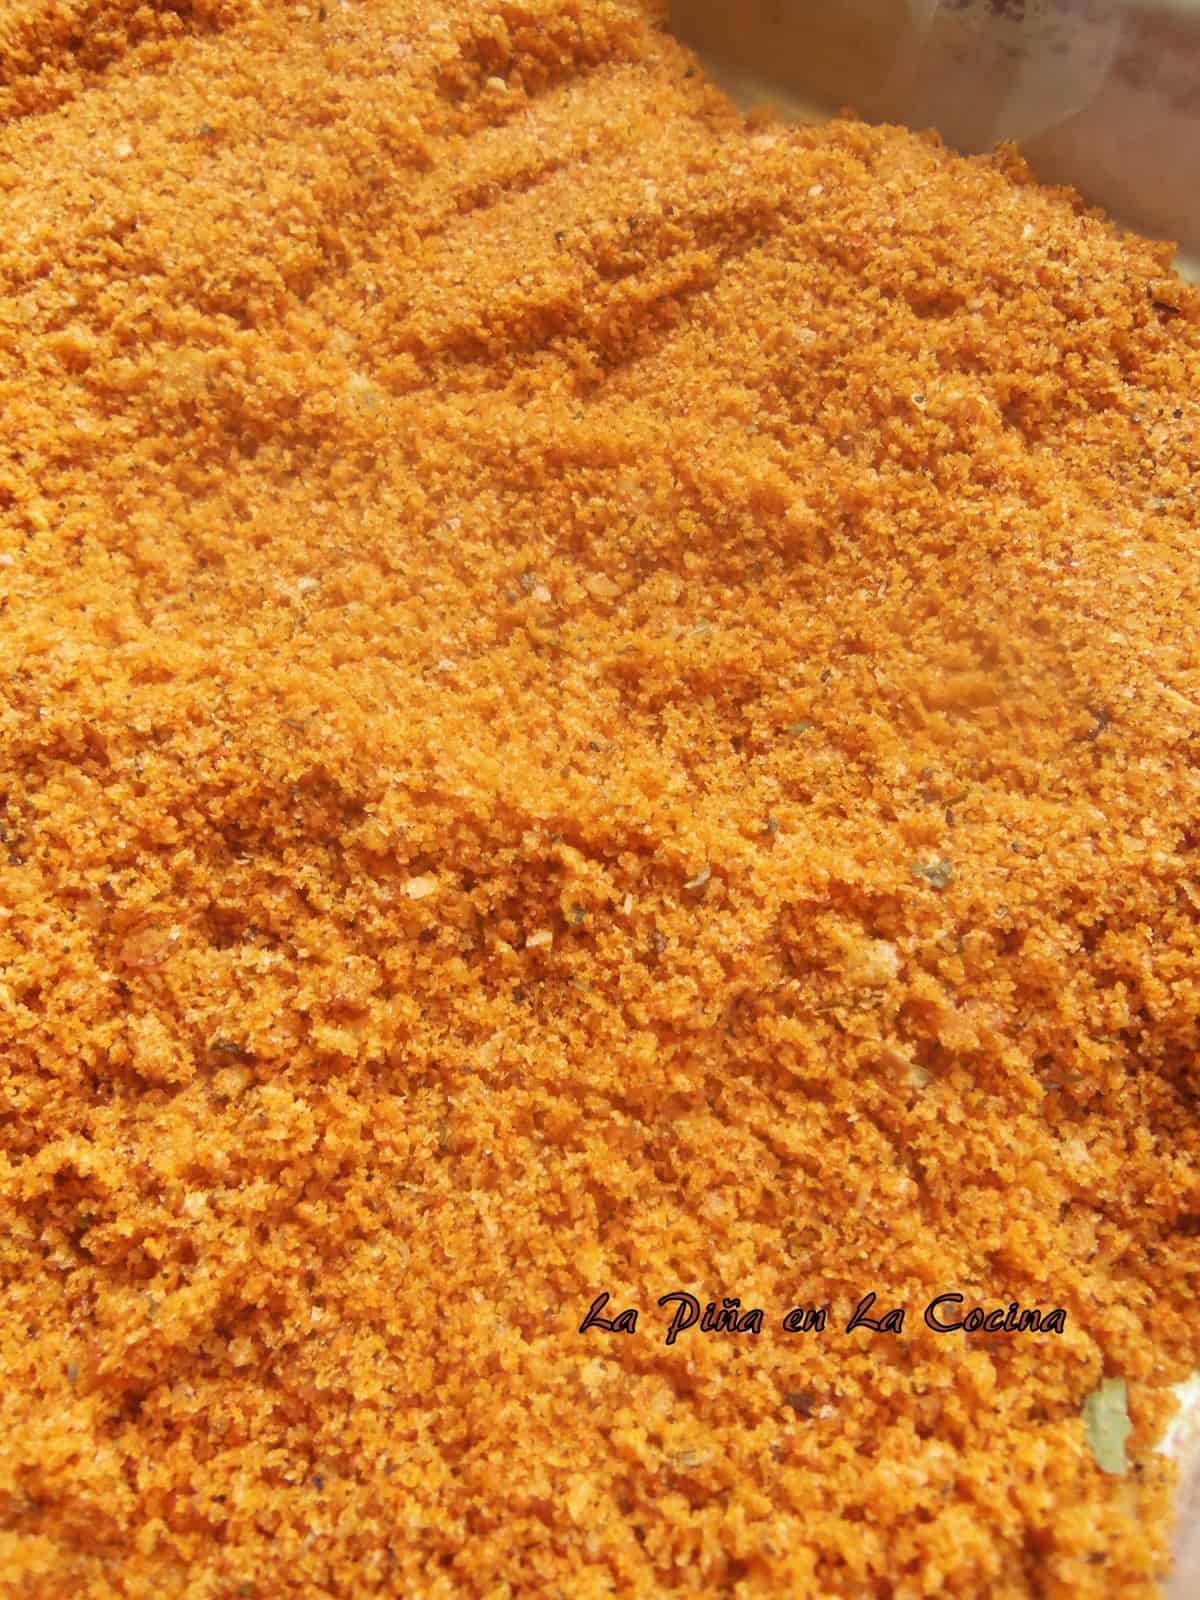 Homemade breadcrumbs are easy to make and great stored in your freezer for a variety of recipes.